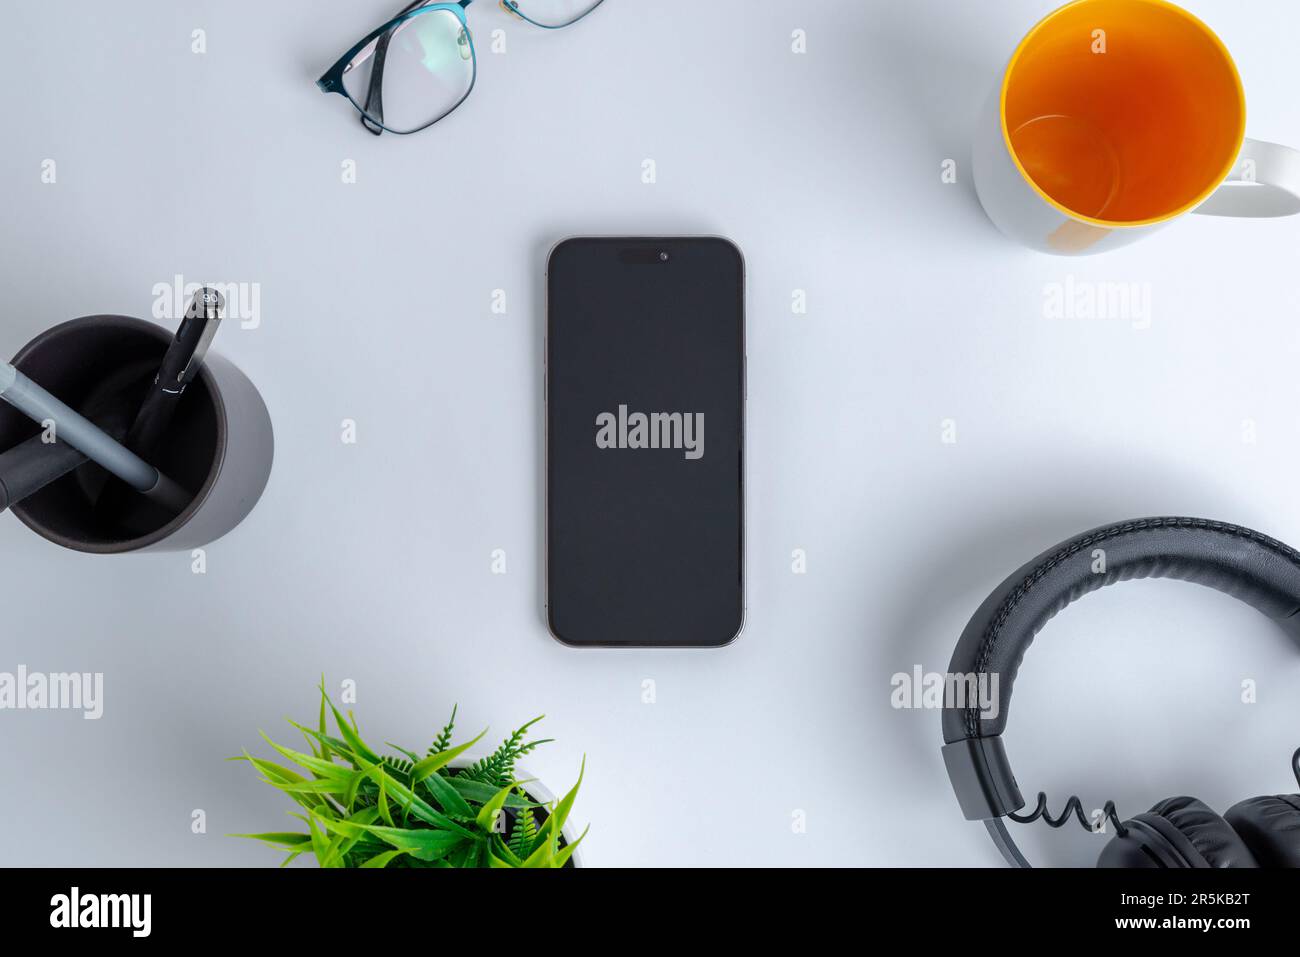 Phone on work desk. Top view, flat lay composition. Surrounded by coffee mug, headset, plant, glasses and pens Stock Photo